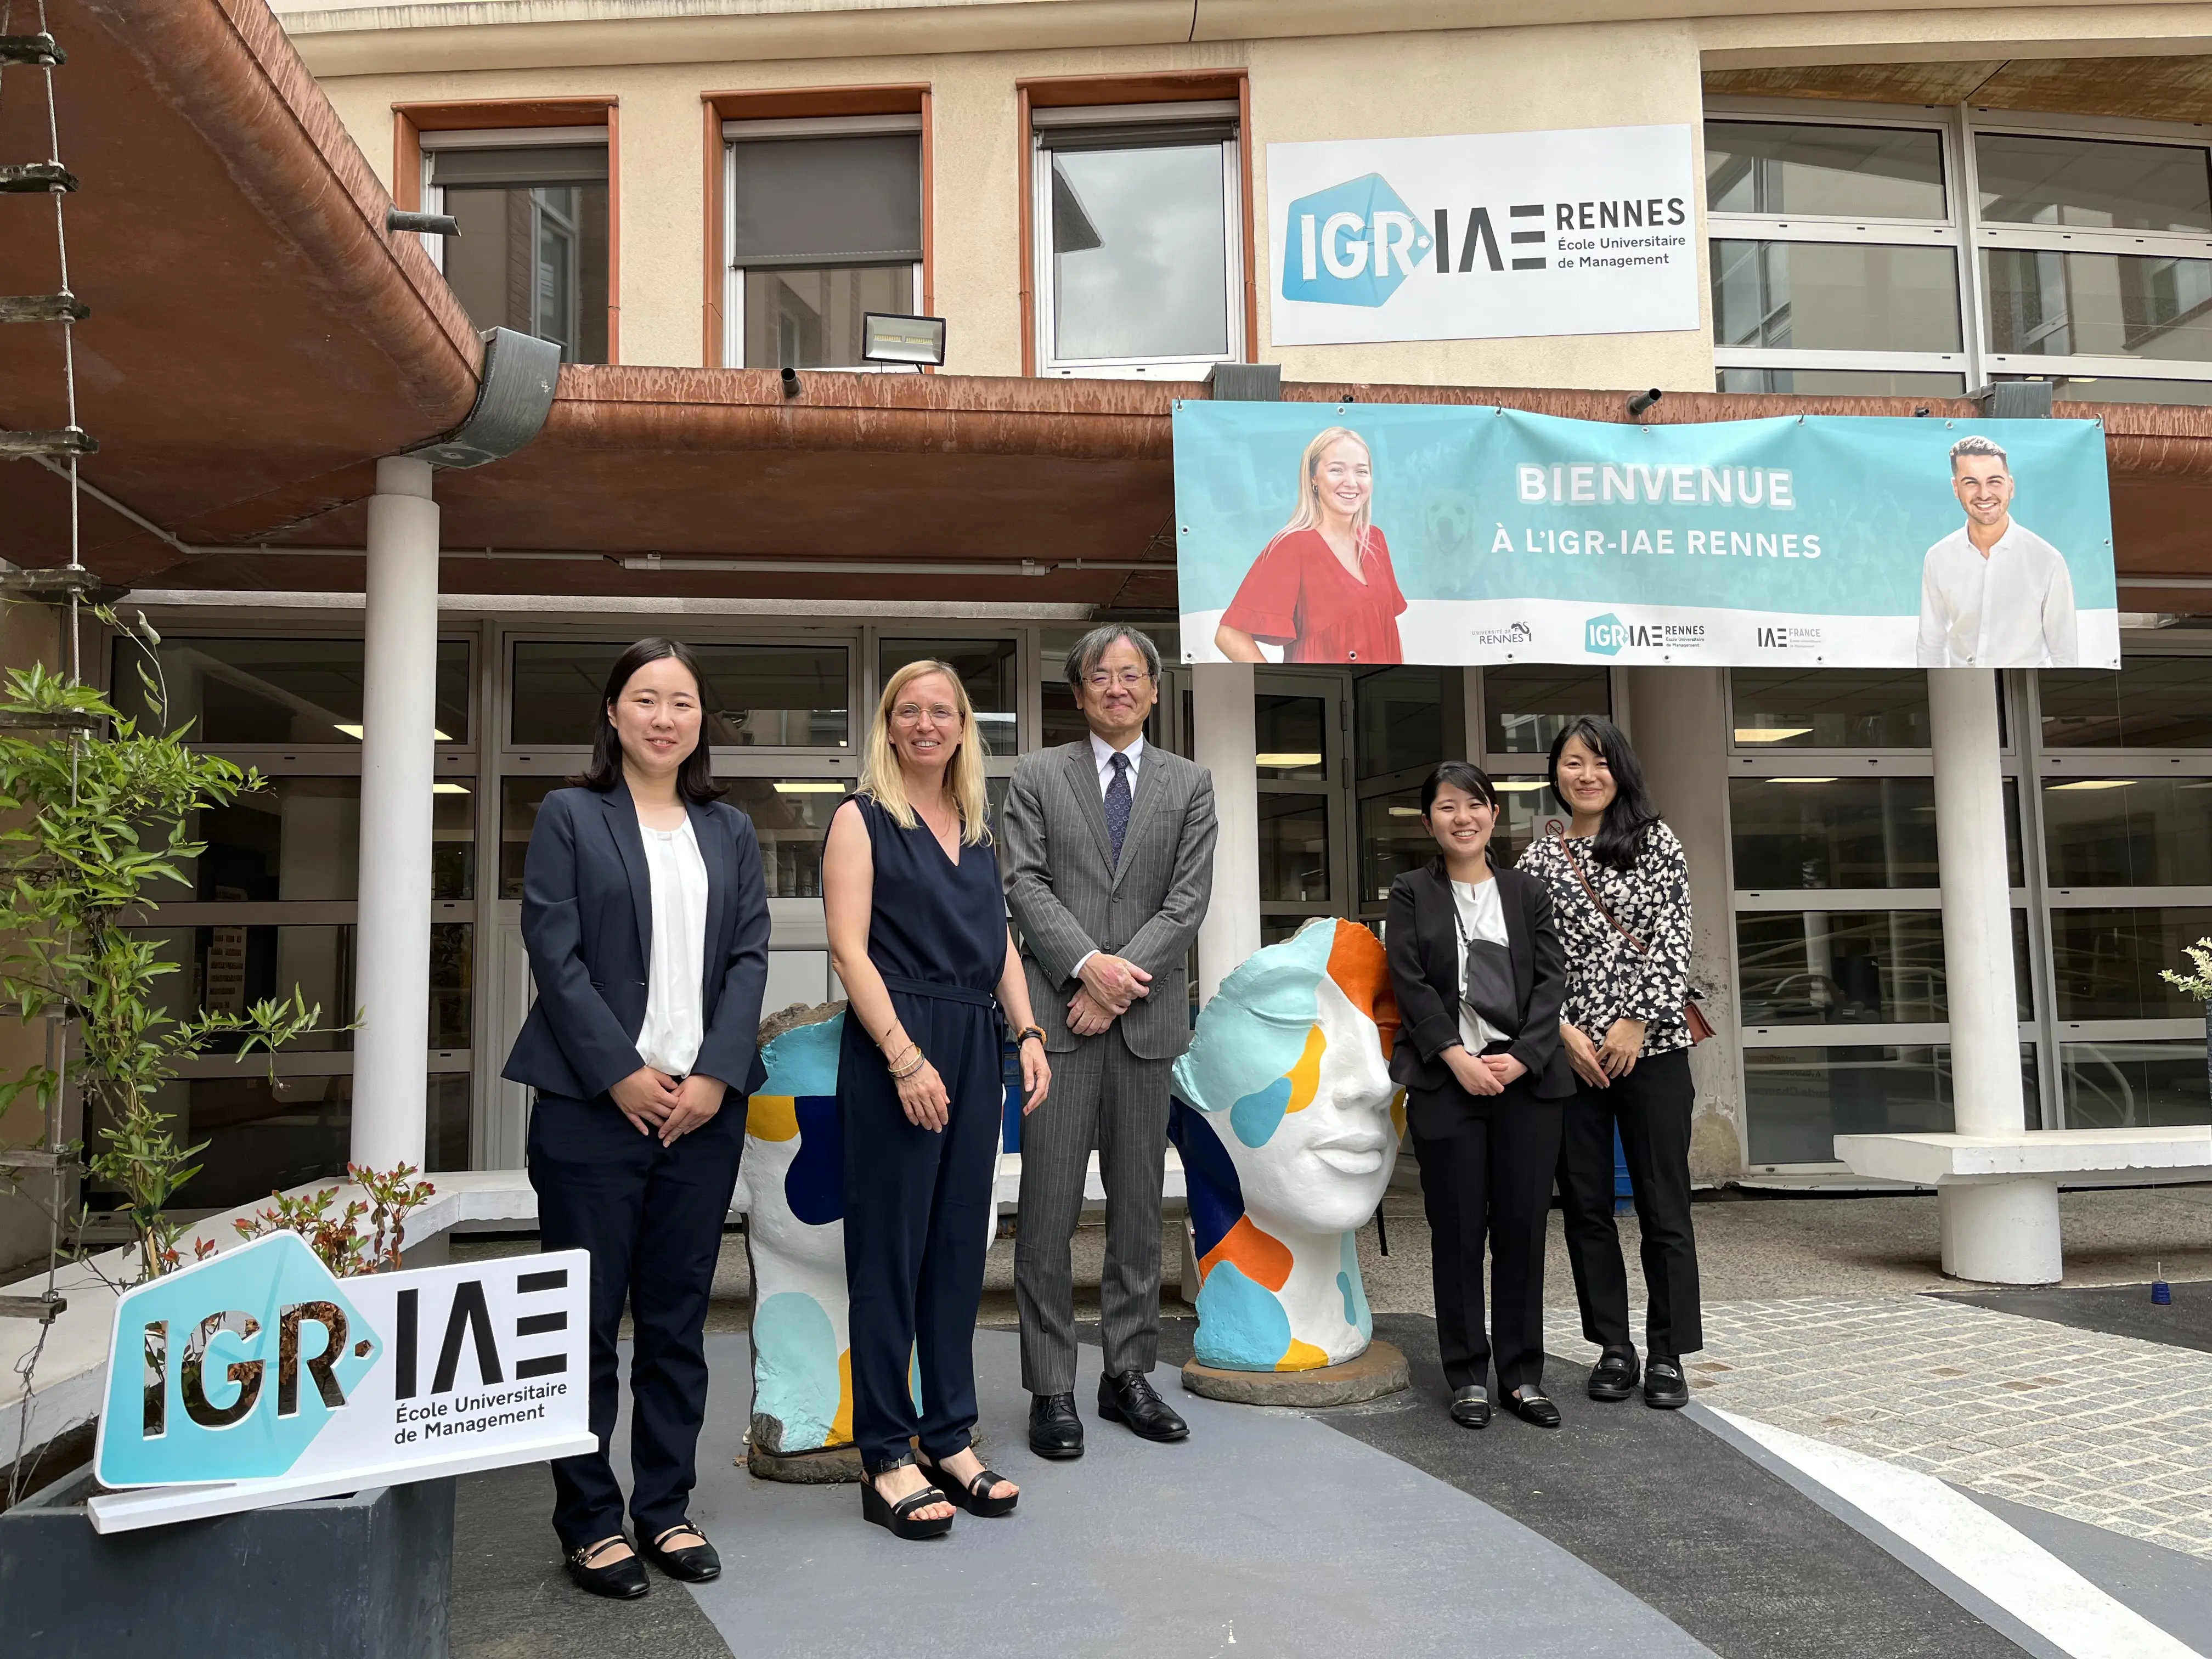 The IGR-IAE Rennes welcomes a Japanese delegation from the University of Chiba